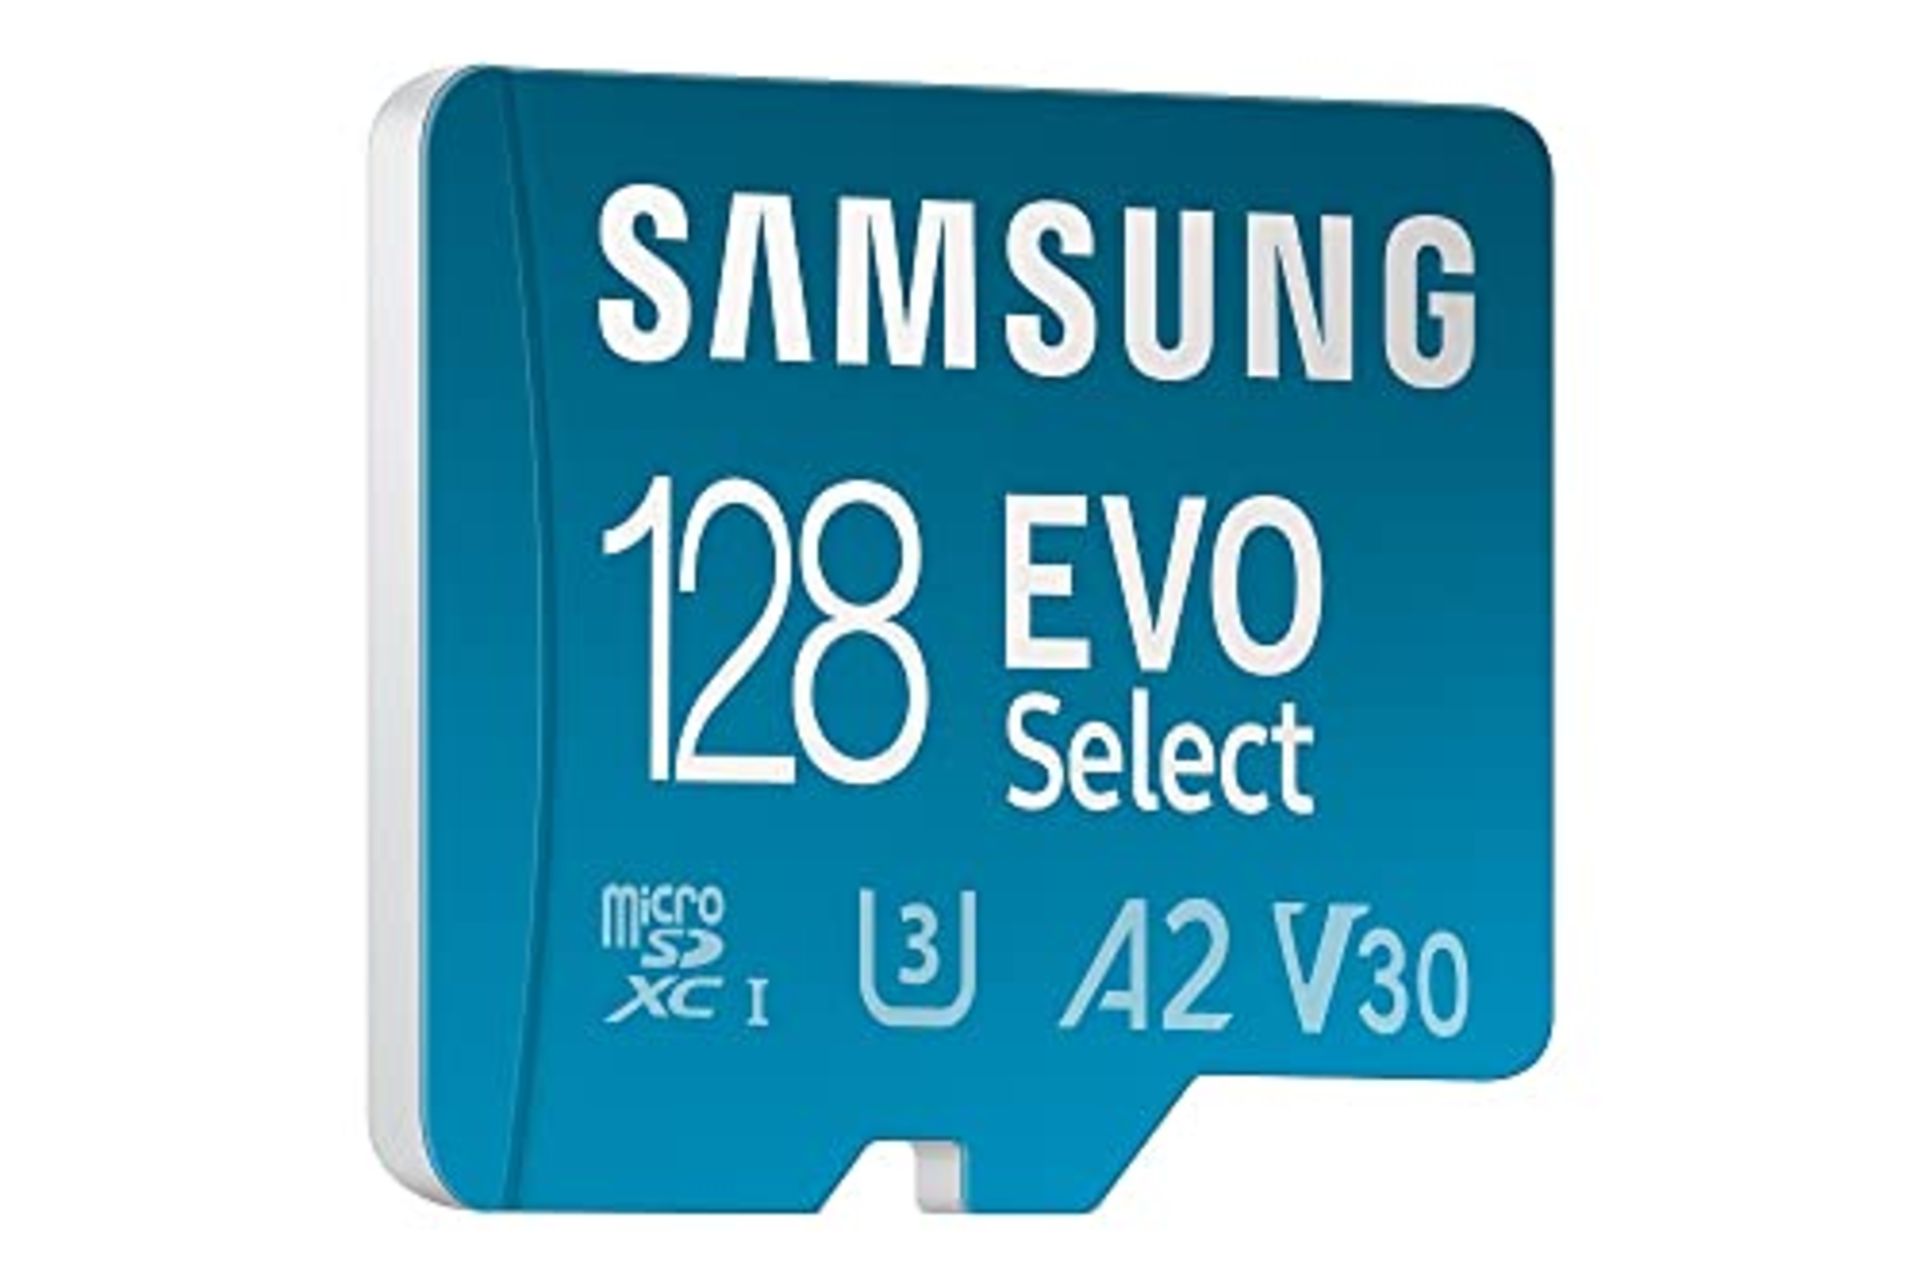 Samsung EVO Select microSD card + SD adapter, 128GB, memory card for smartphone and ta